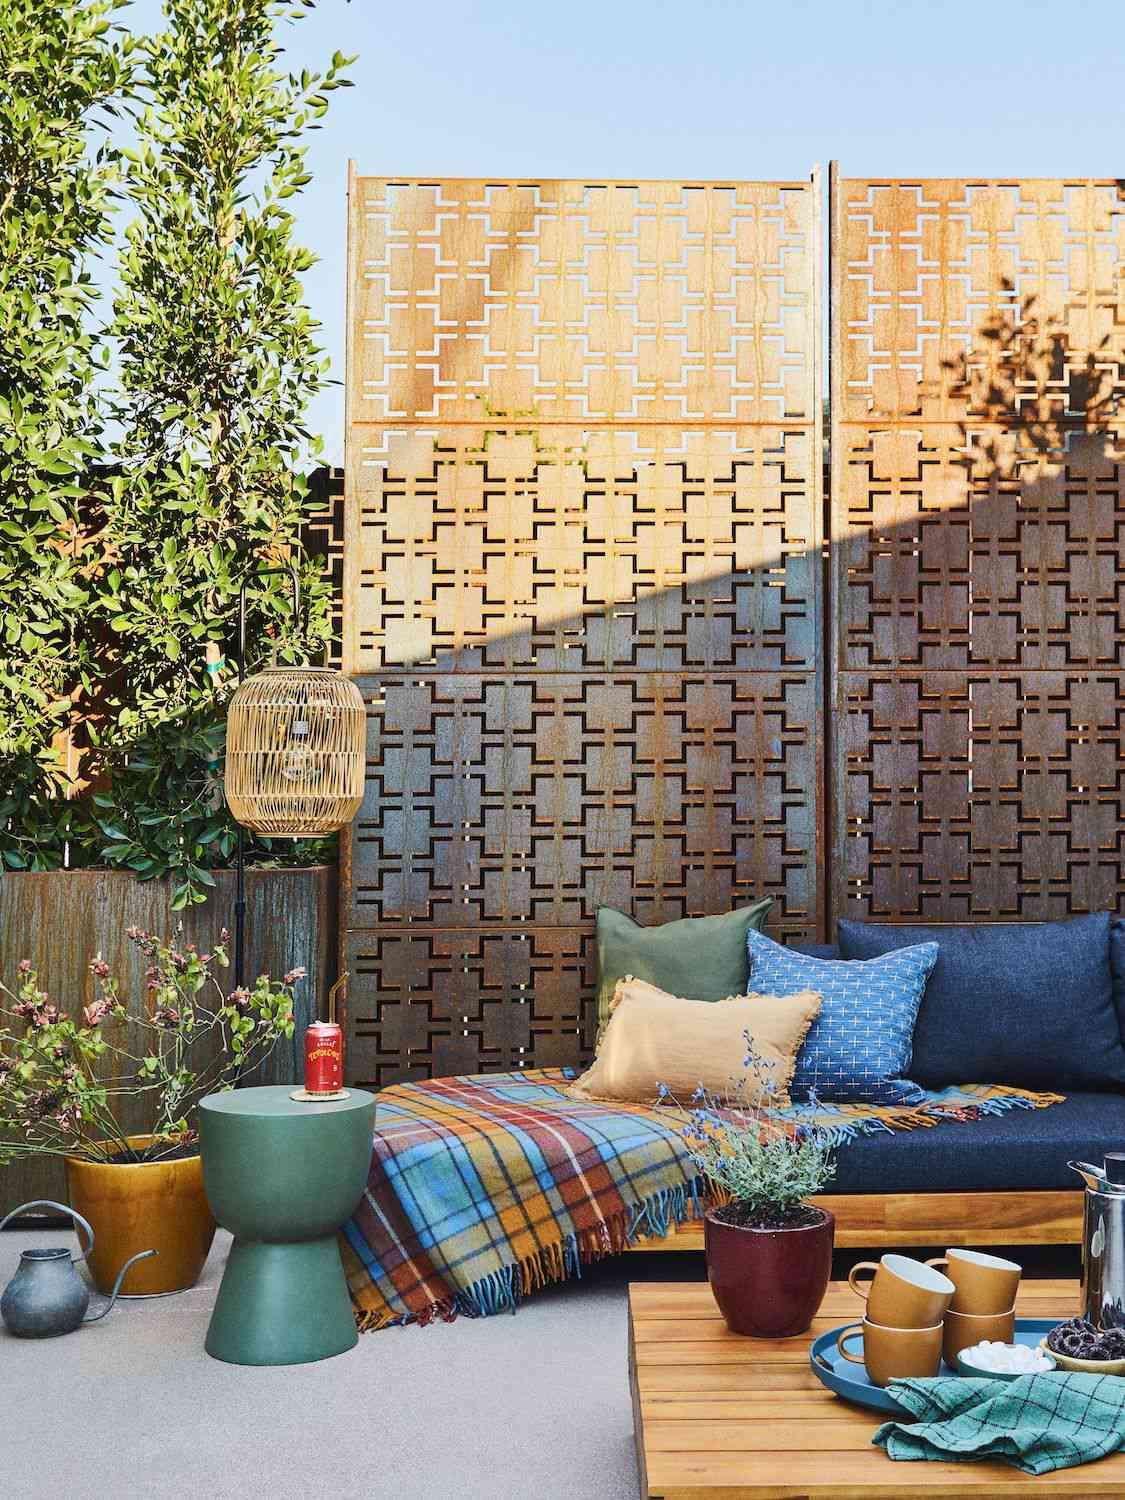 Creating a Private Oasis: Creative Patio Ideas for Seclusion